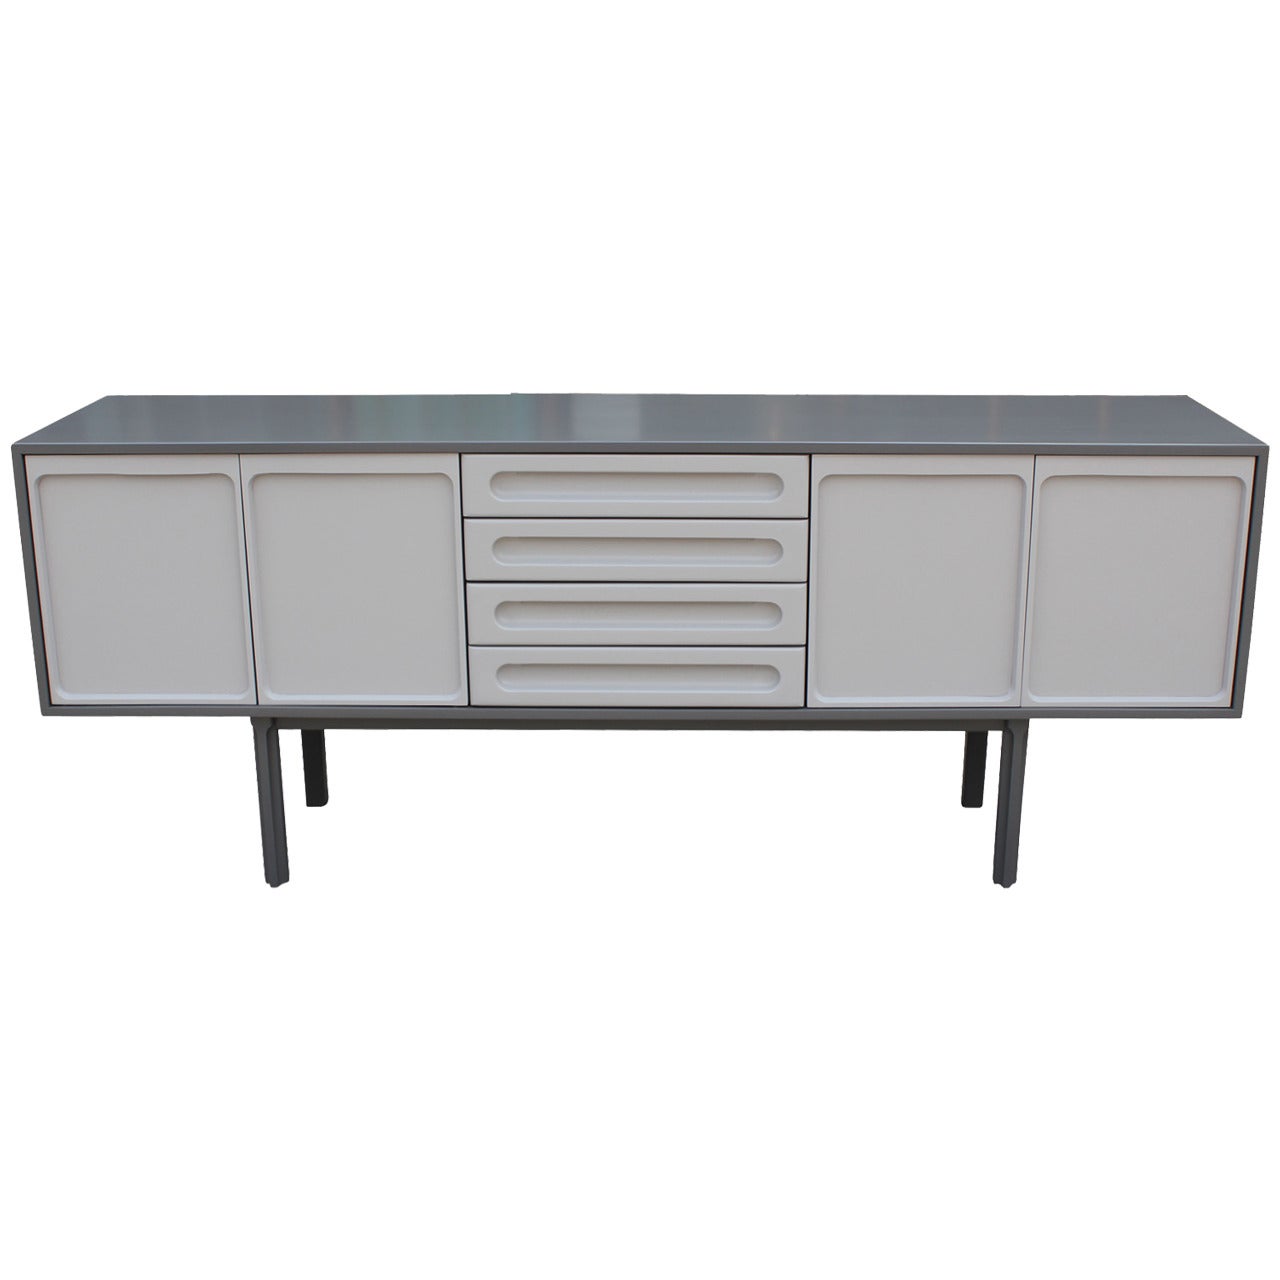 Incredible Tone on Tone Grey Lacquered Sideboard